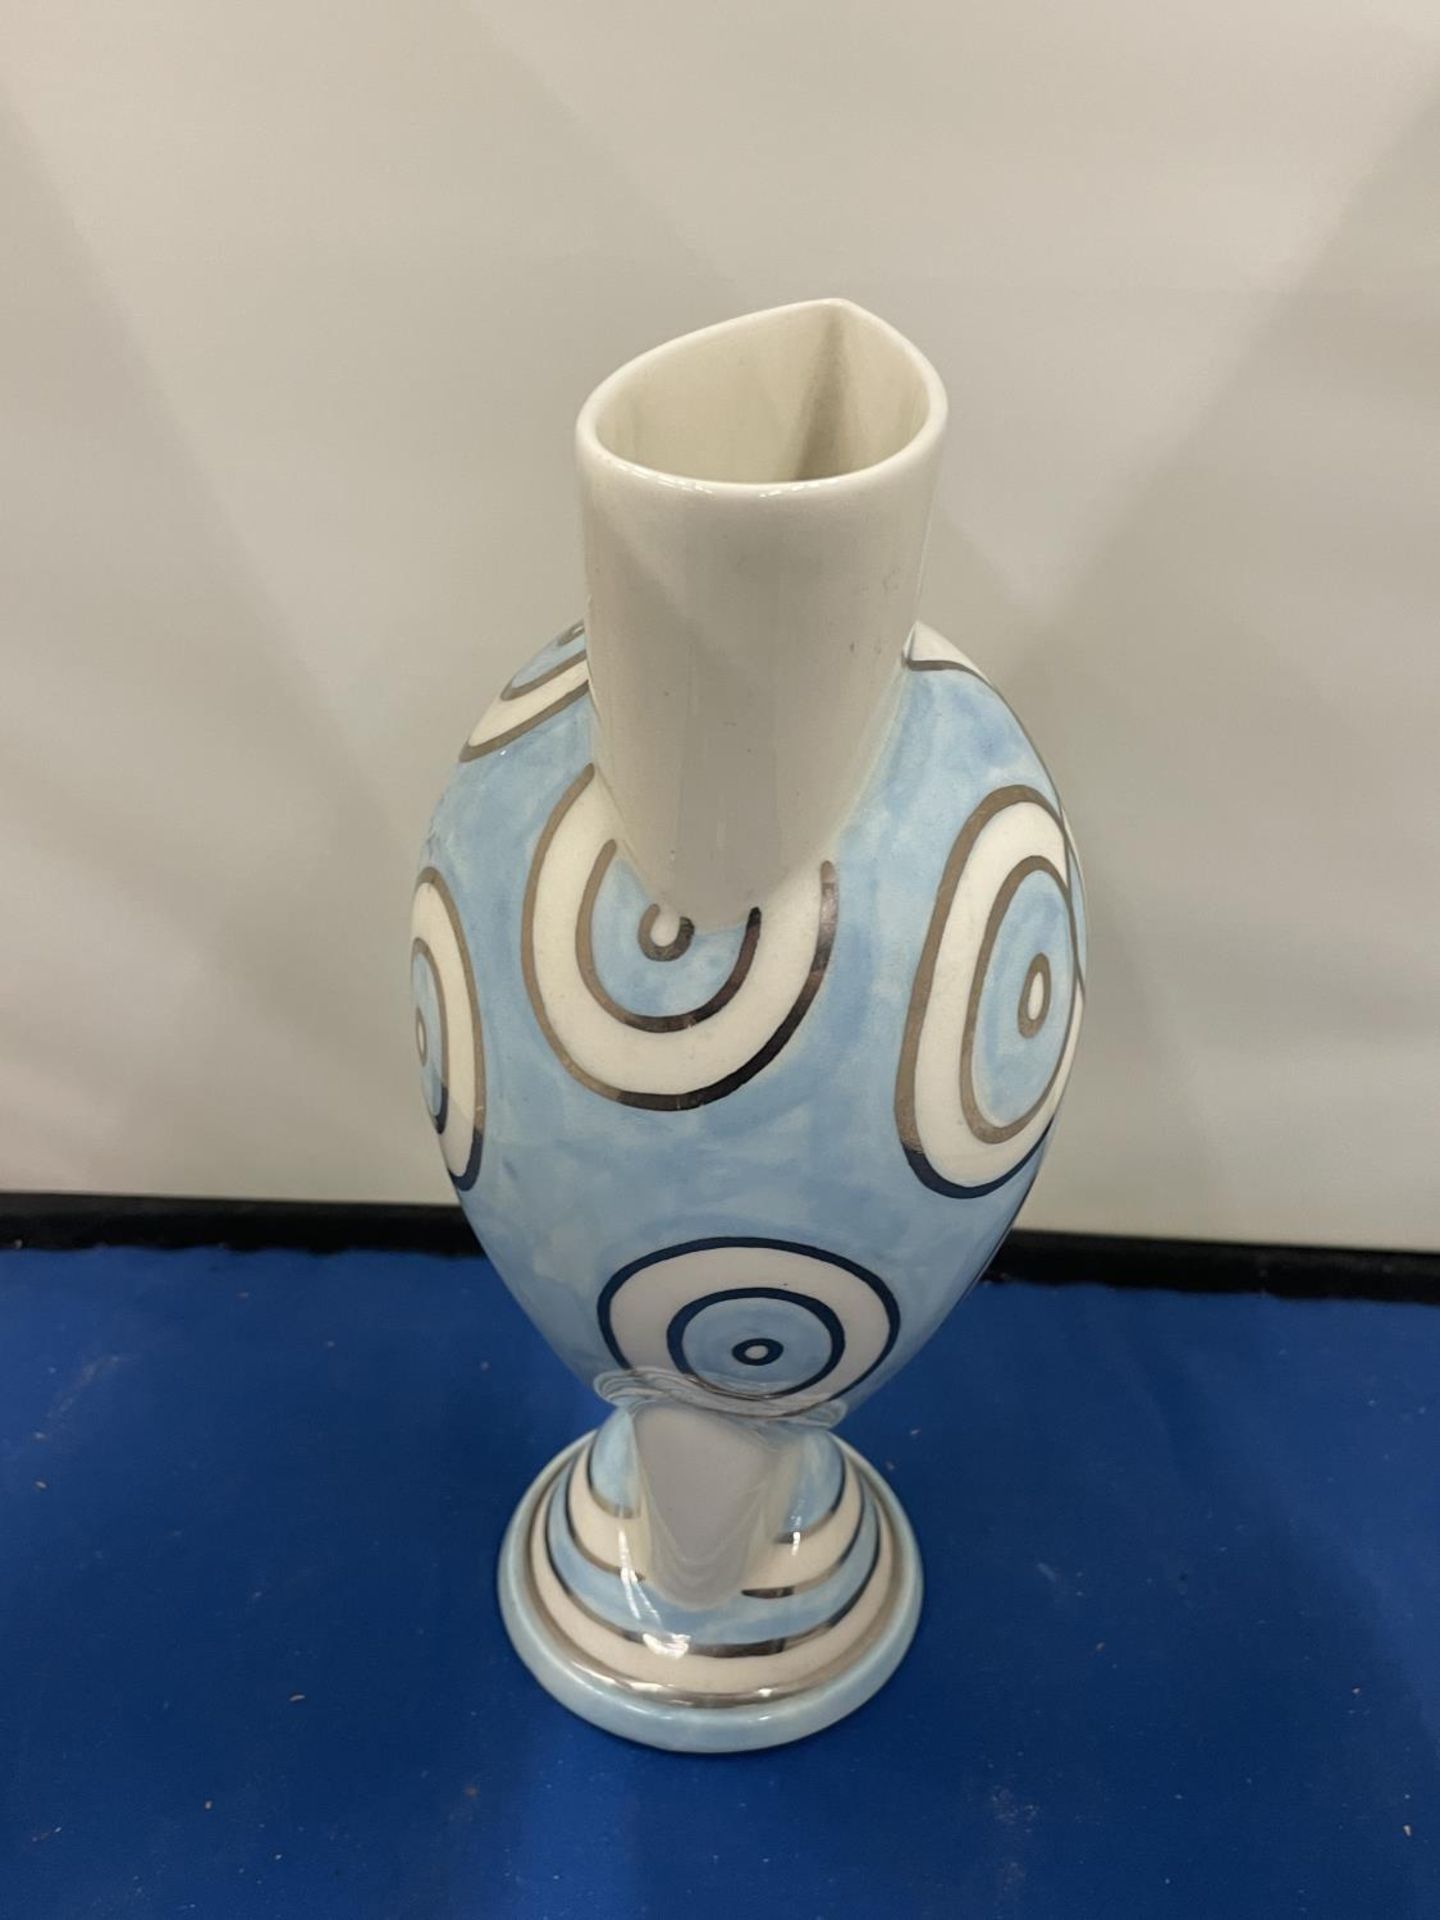 A LIMITED EDITION 8/250 SMIC VASE BY COLIN DOWNES IN THE STYLE OF CLARICE CLIFF - Image 3 of 8